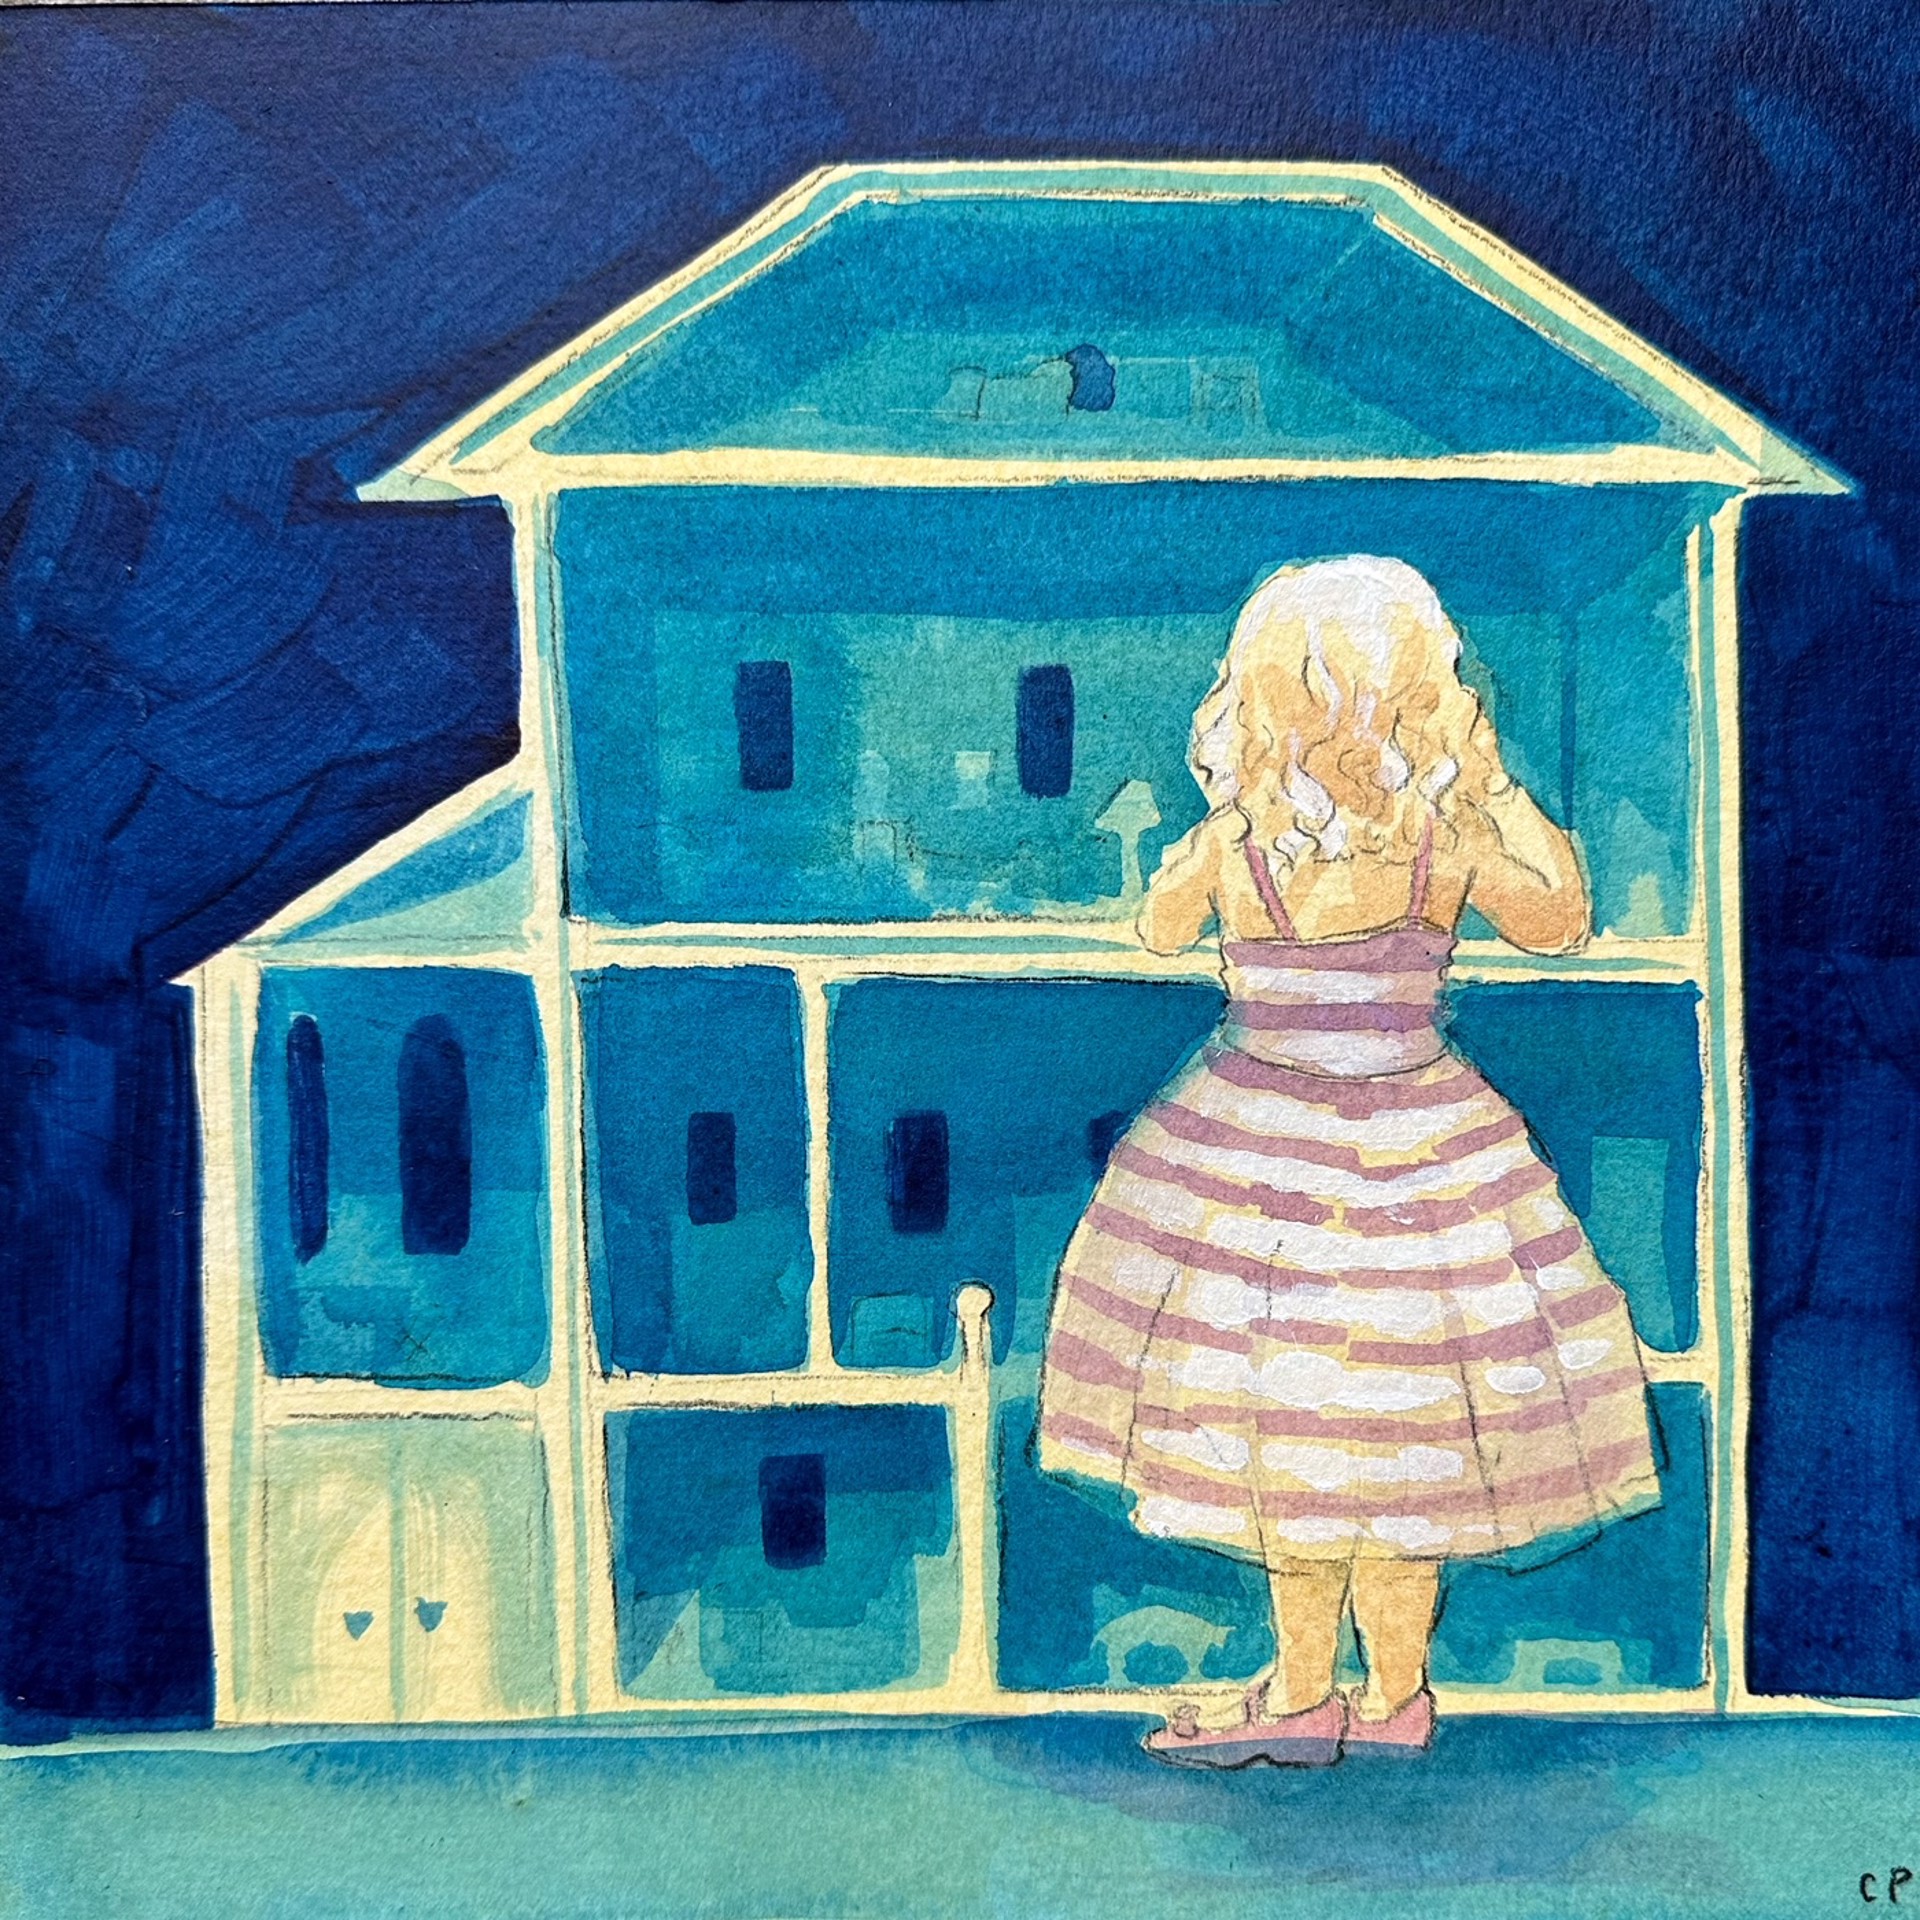 The Dollhouse by Cullen Peck